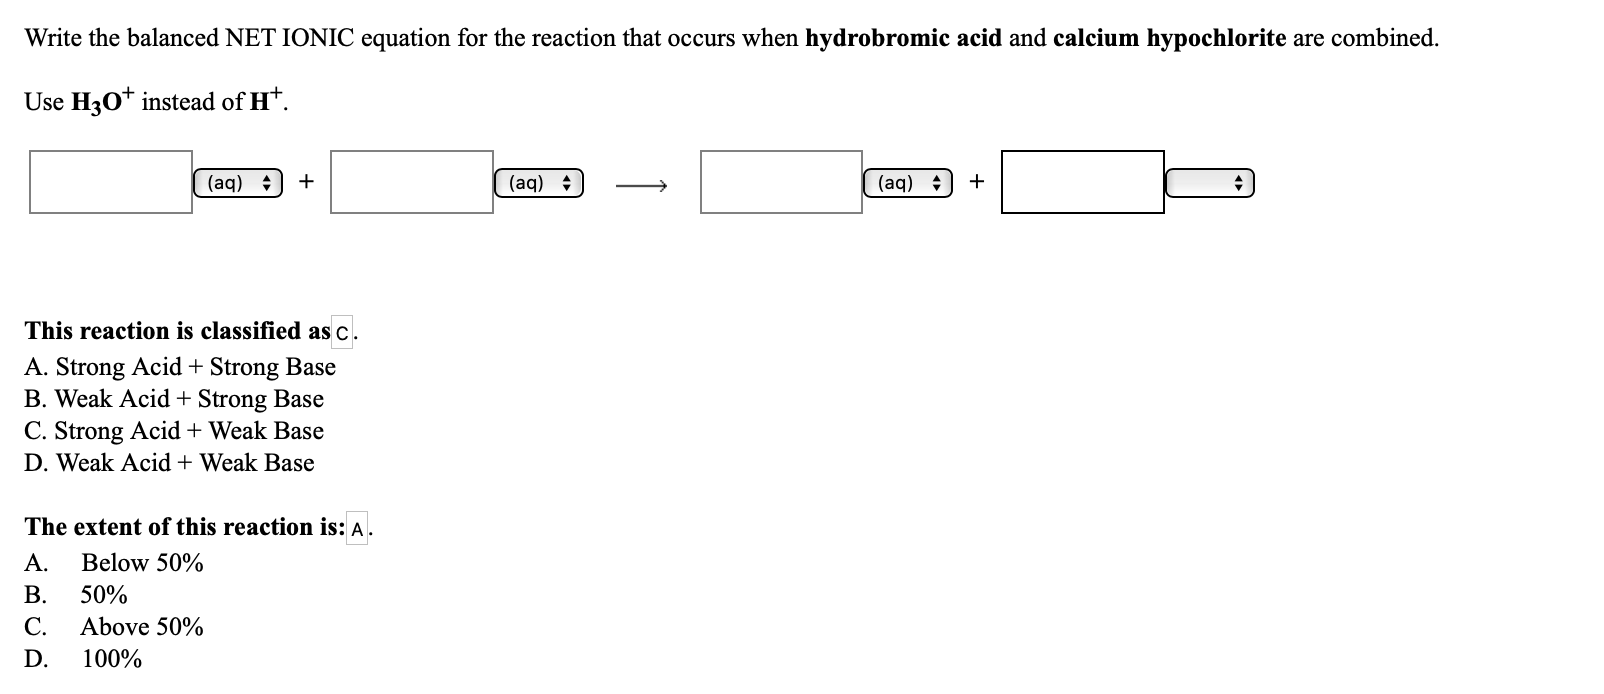 Write the balanced NET IONIC equation for the reaction that occurs when hydrobromic acid and calcium hypochlorite are combined.
Use H30* instead of H*.
(aq)
(aq)
(aq) :
This reaction is classified as c.
A. Strong Acid + Strong Base
B. Weak Acid + Strong Base
C. Strong Acid + Weak Base
D. Weak Acid + Weak Base
The extent of this reaction is: A.
A.
Below 50%
B.
50%
C.
Above 50%
D.
100%
